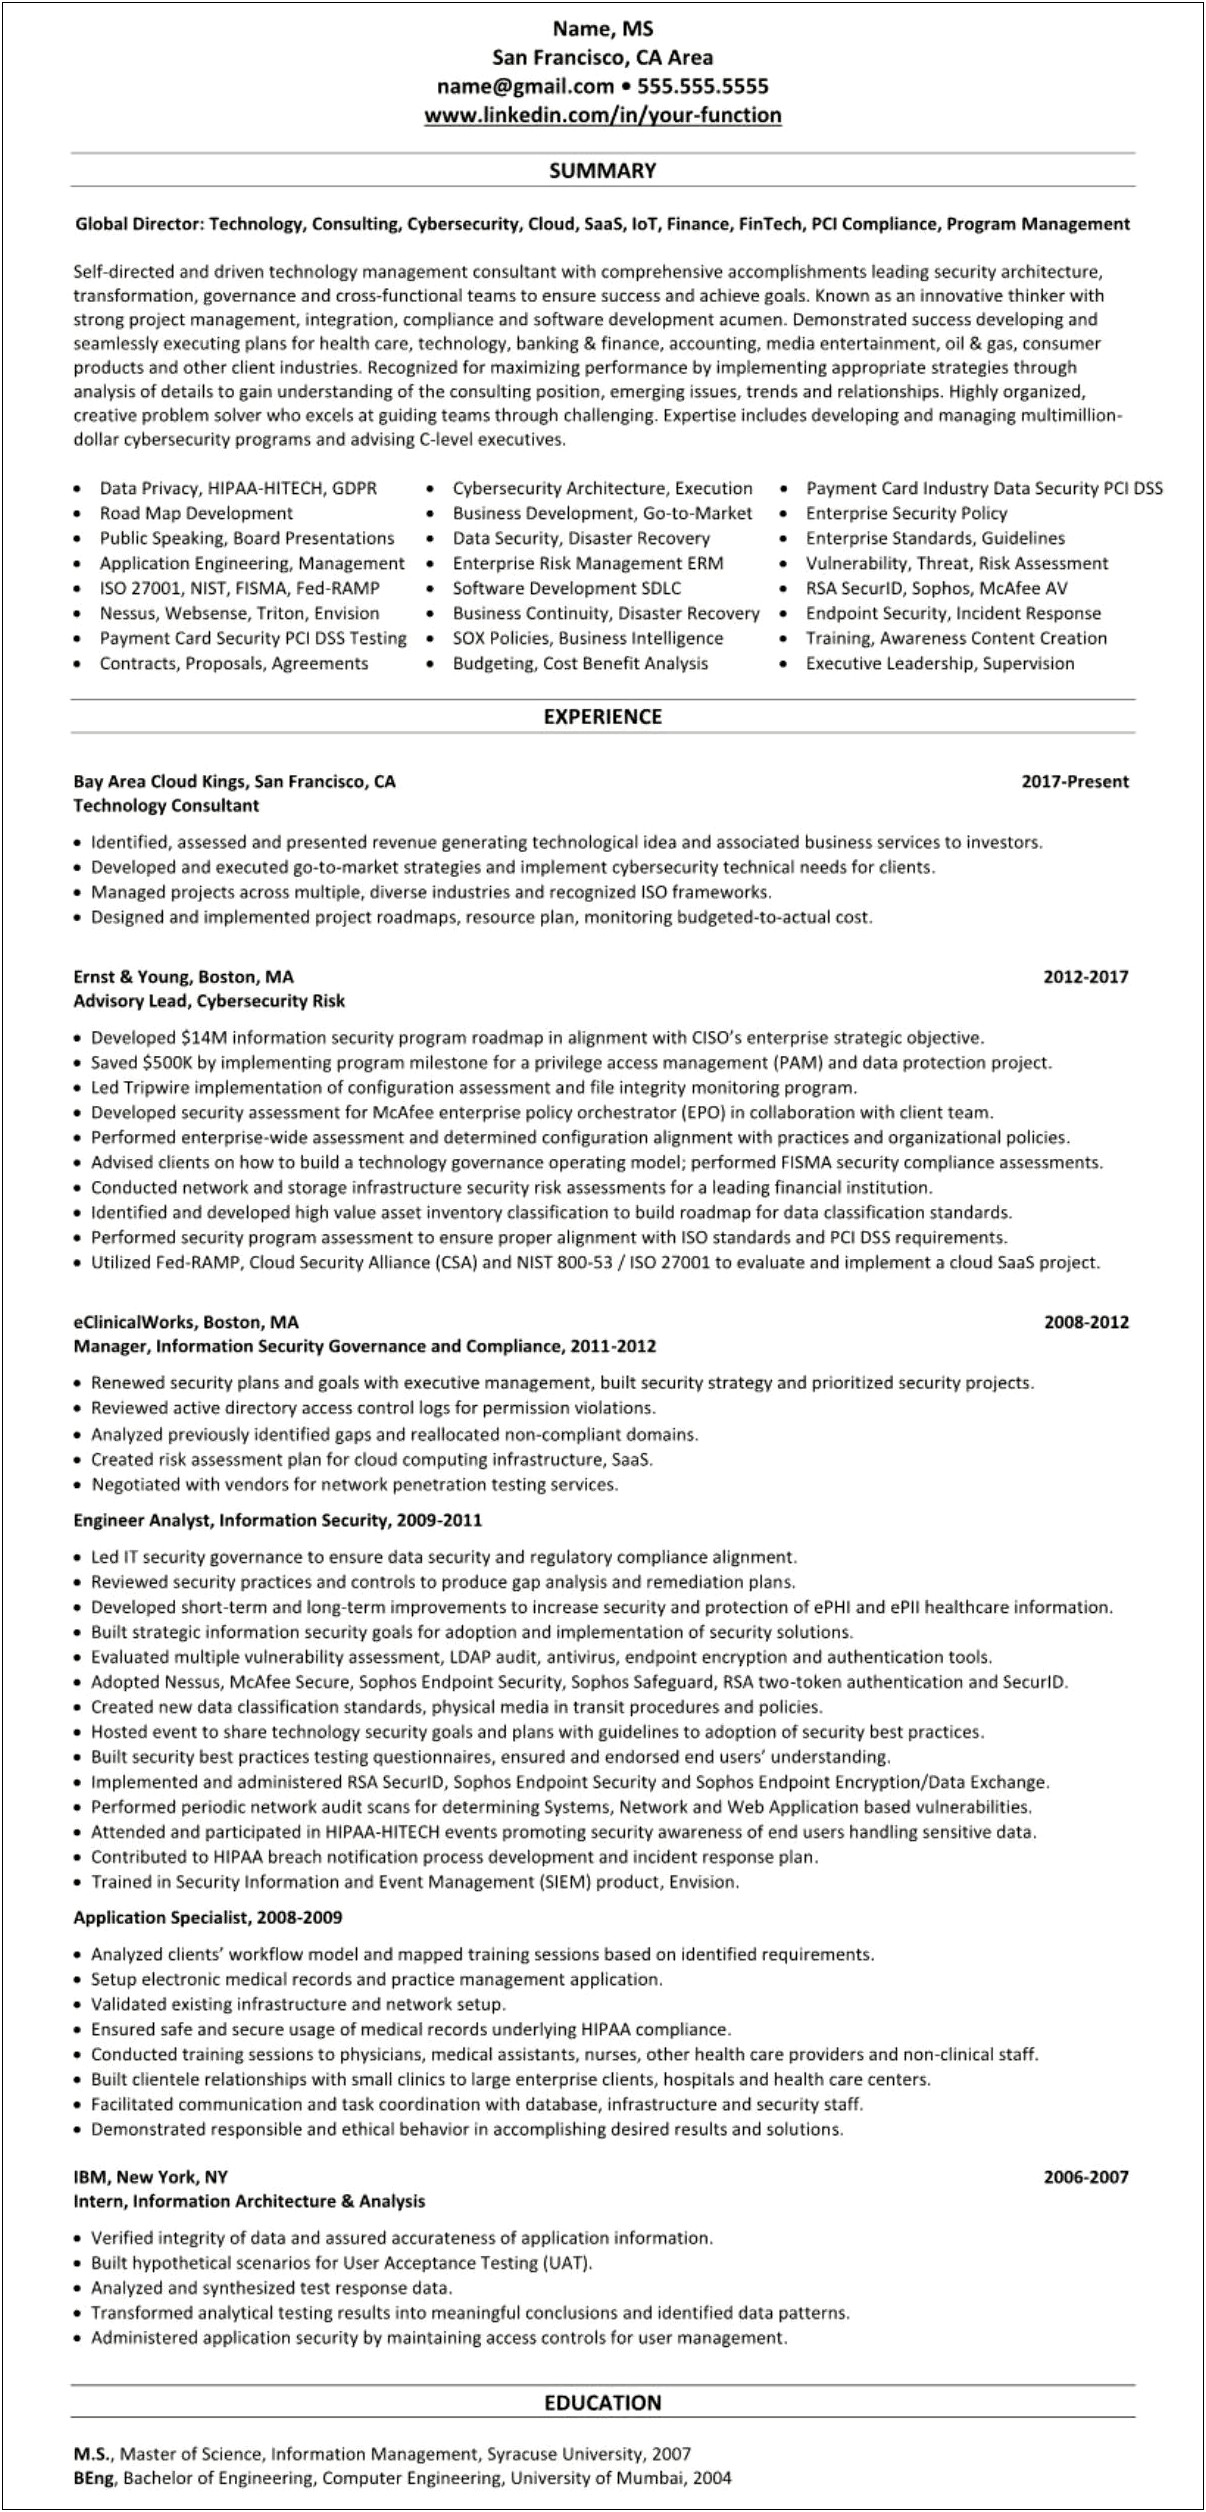 Executive Summary Of Resume For Information Security Professional